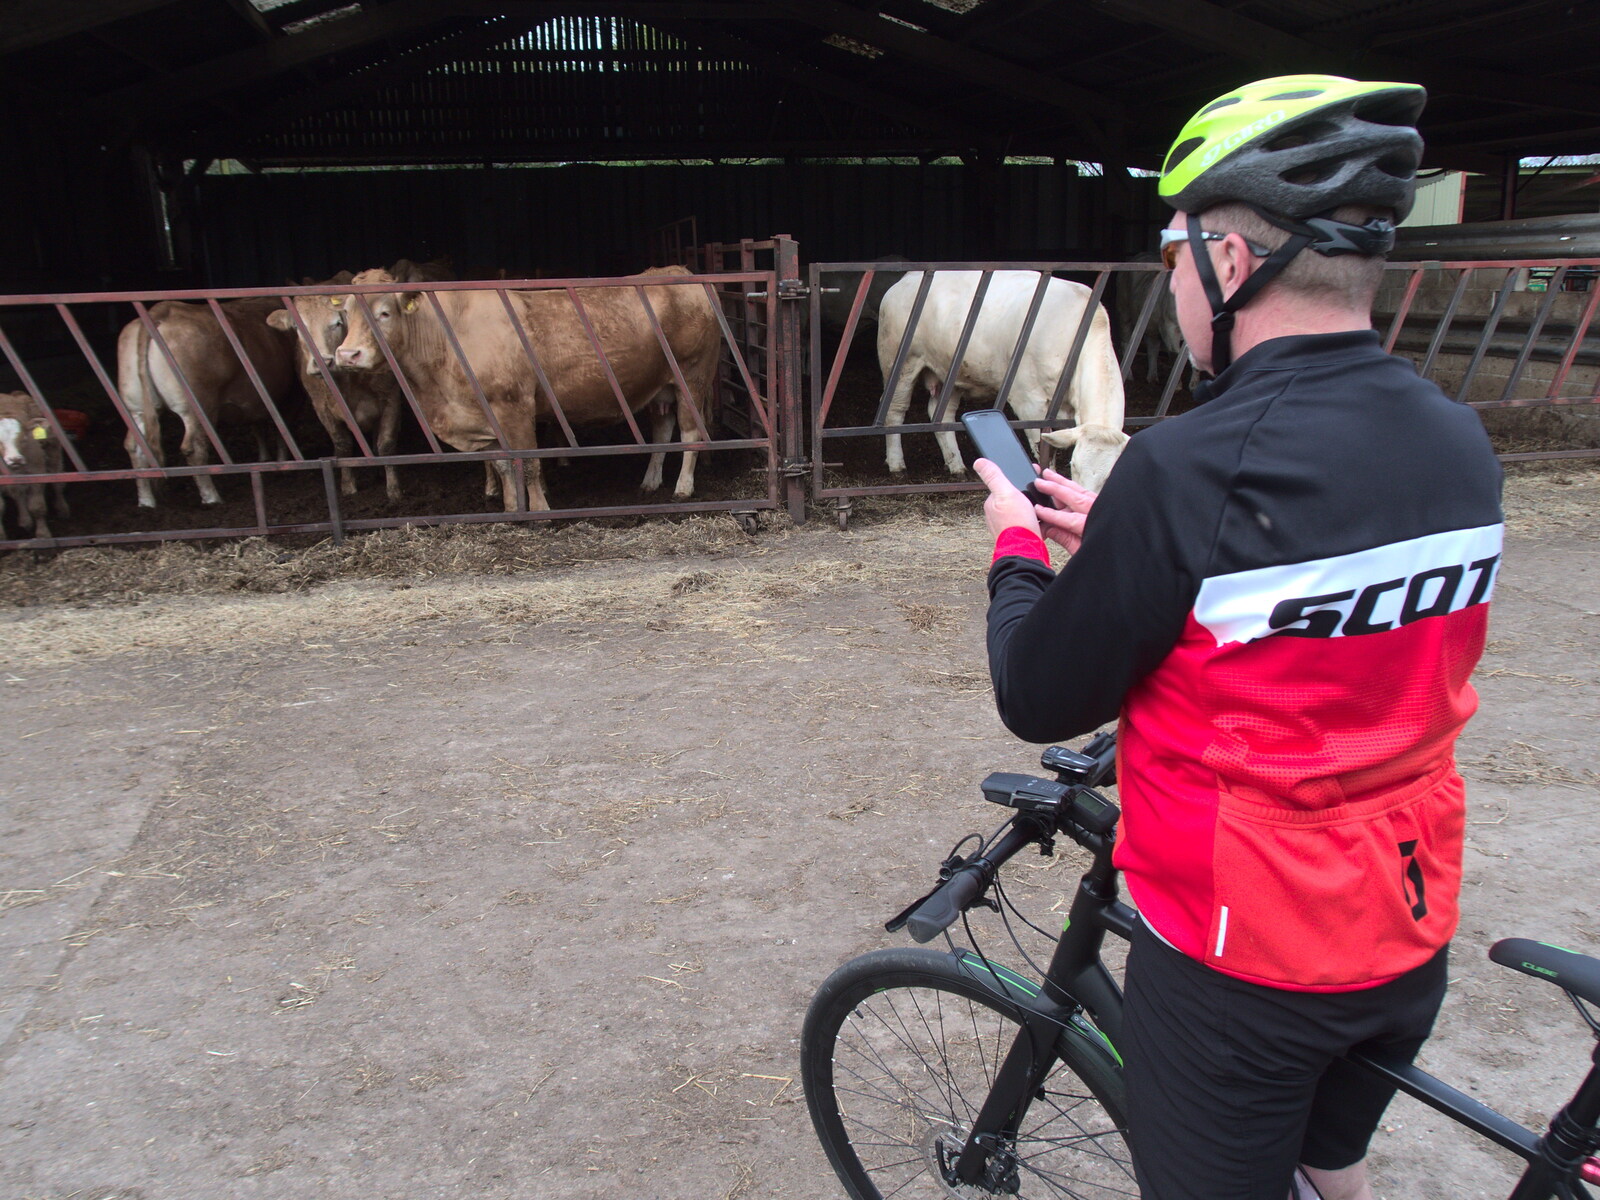 Gaz takes a photo of cows from The BSCC at the King's Head, Brockdish, Norfolk - 13th May 2021